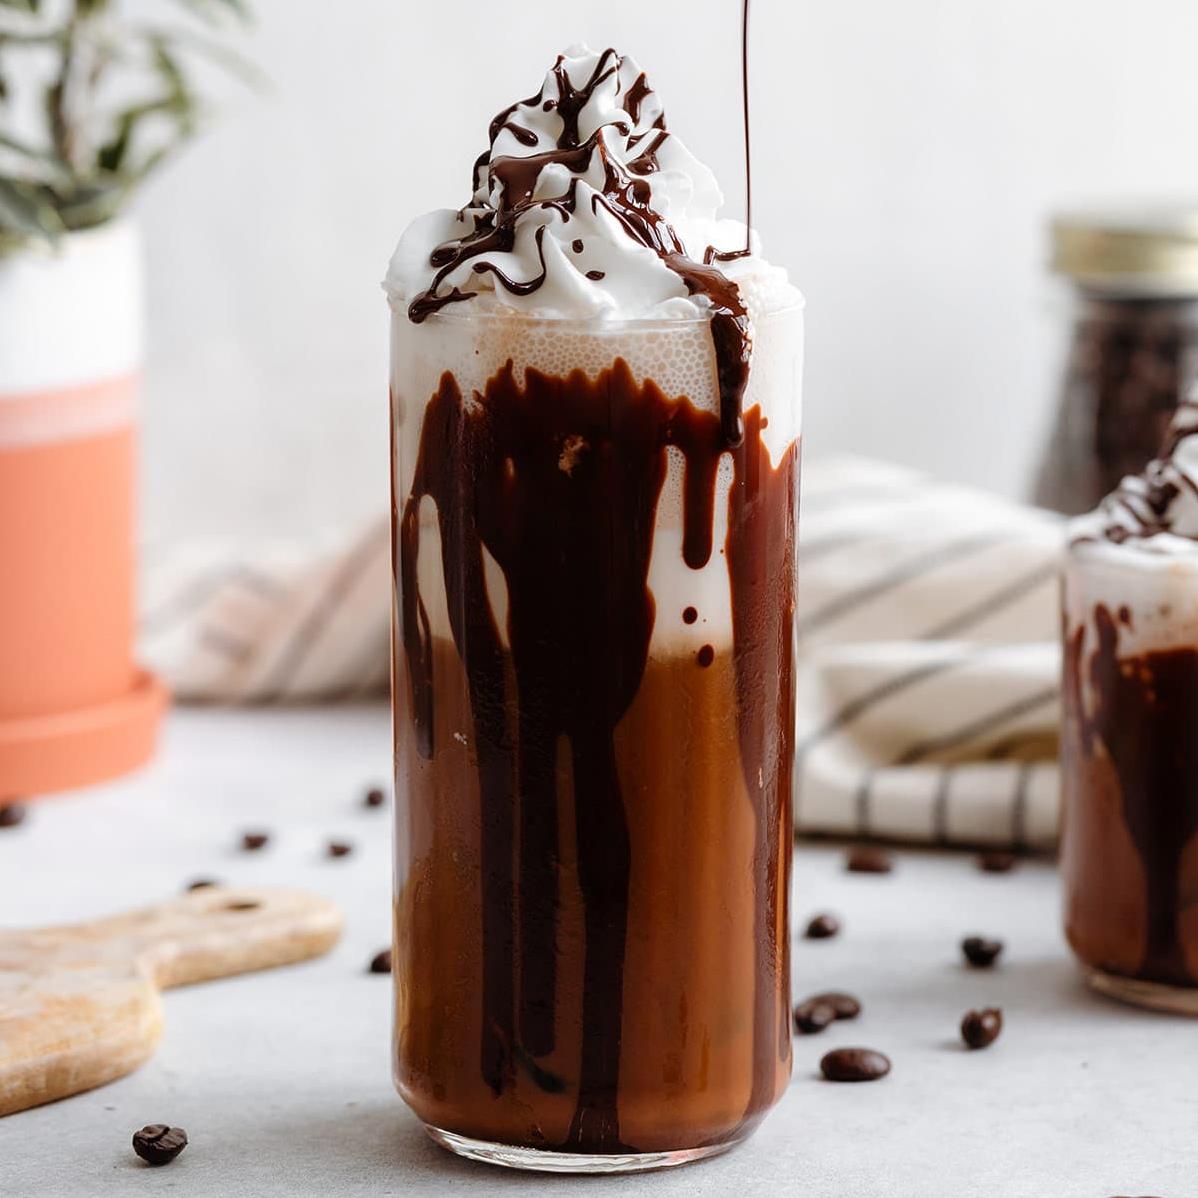  Make your mornings better with this simple Iced Chocolate Coffee recipe.